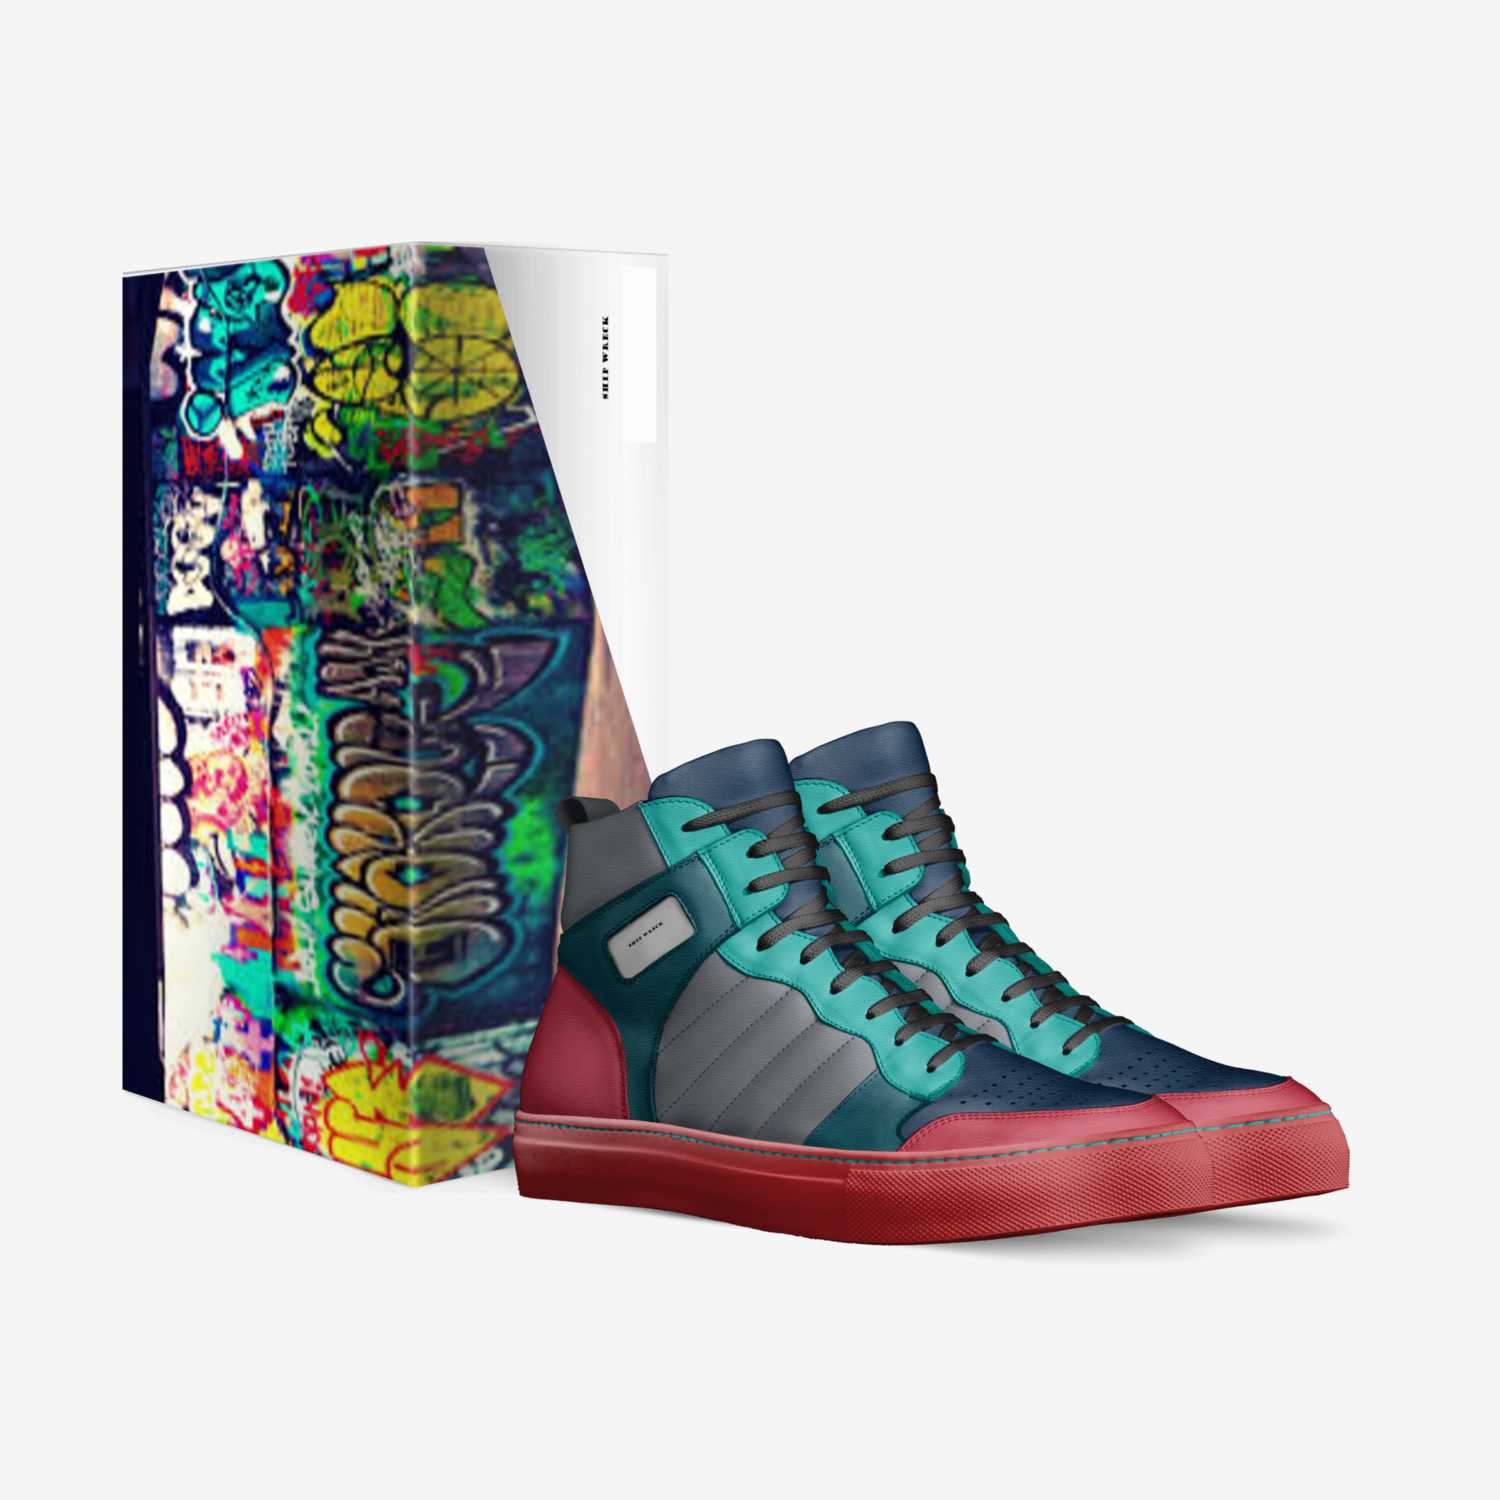 Sky shooters custom made in Italy shoes by Alex Mcsween | Box view